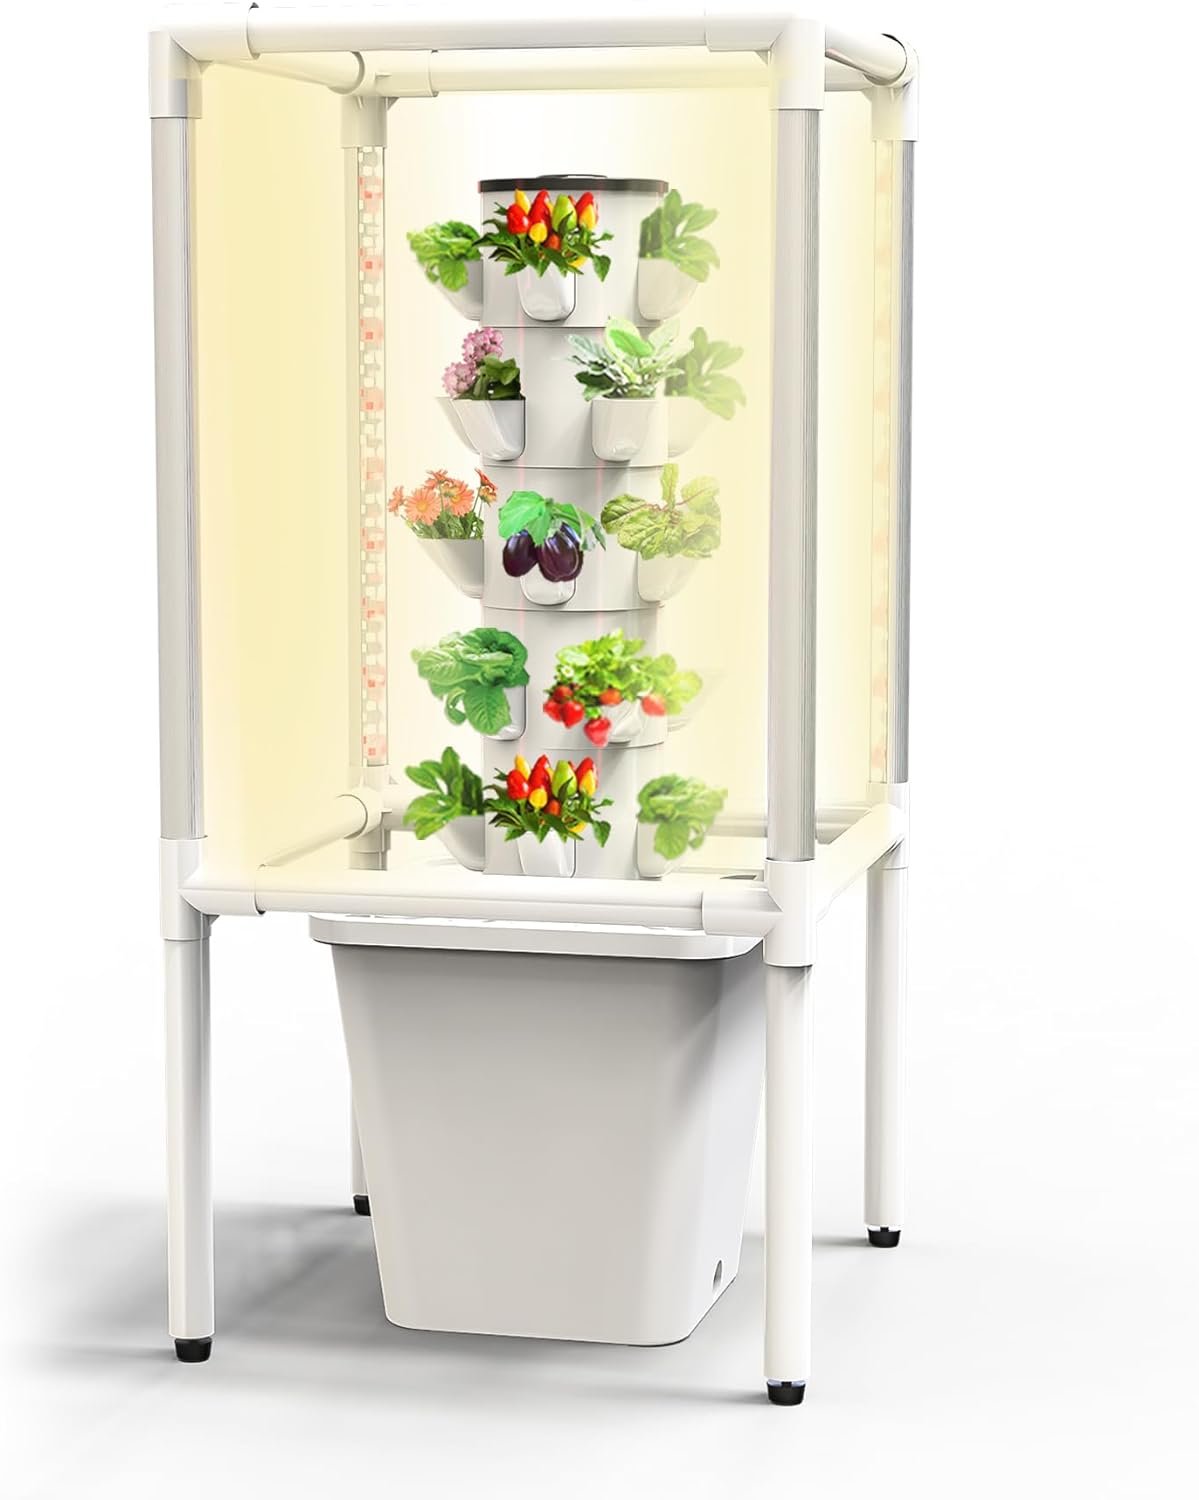 Sjzx Hydroponic Growing System with Grow Lights (No Seedlings Included) |25-Plant Hydroponic System | Home Gardening System for Indoor Herbs, Fruits and Vegetables | BPA-Free Food Grade